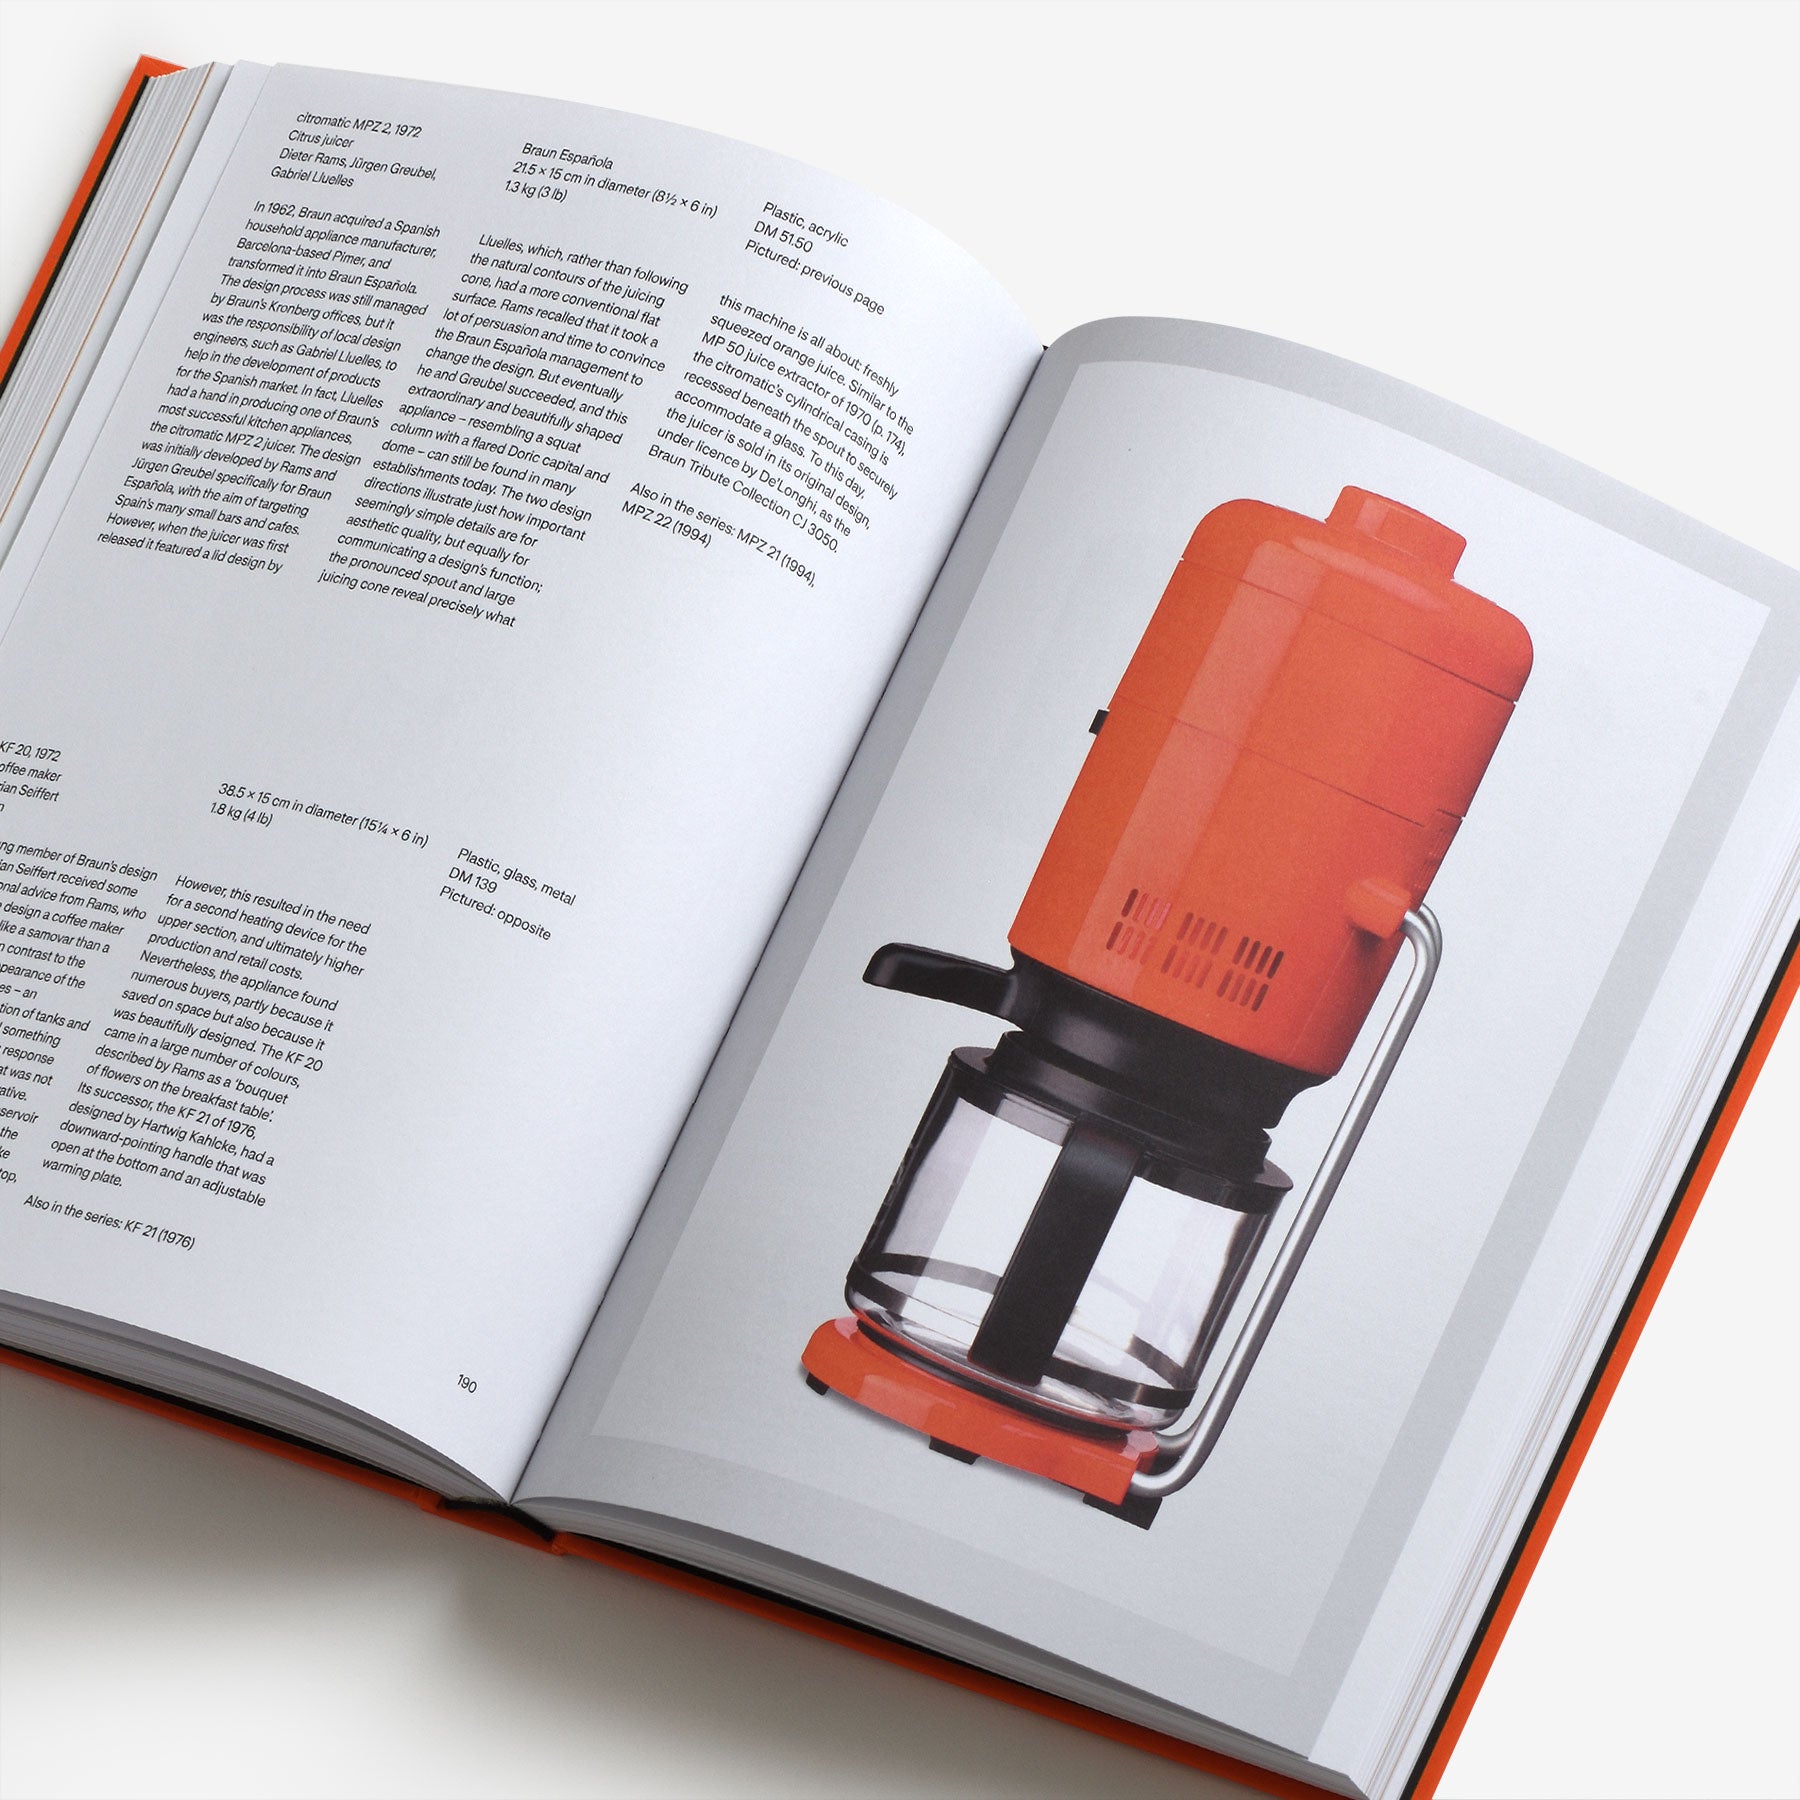 Dieter Rams: The Complete Works | North East